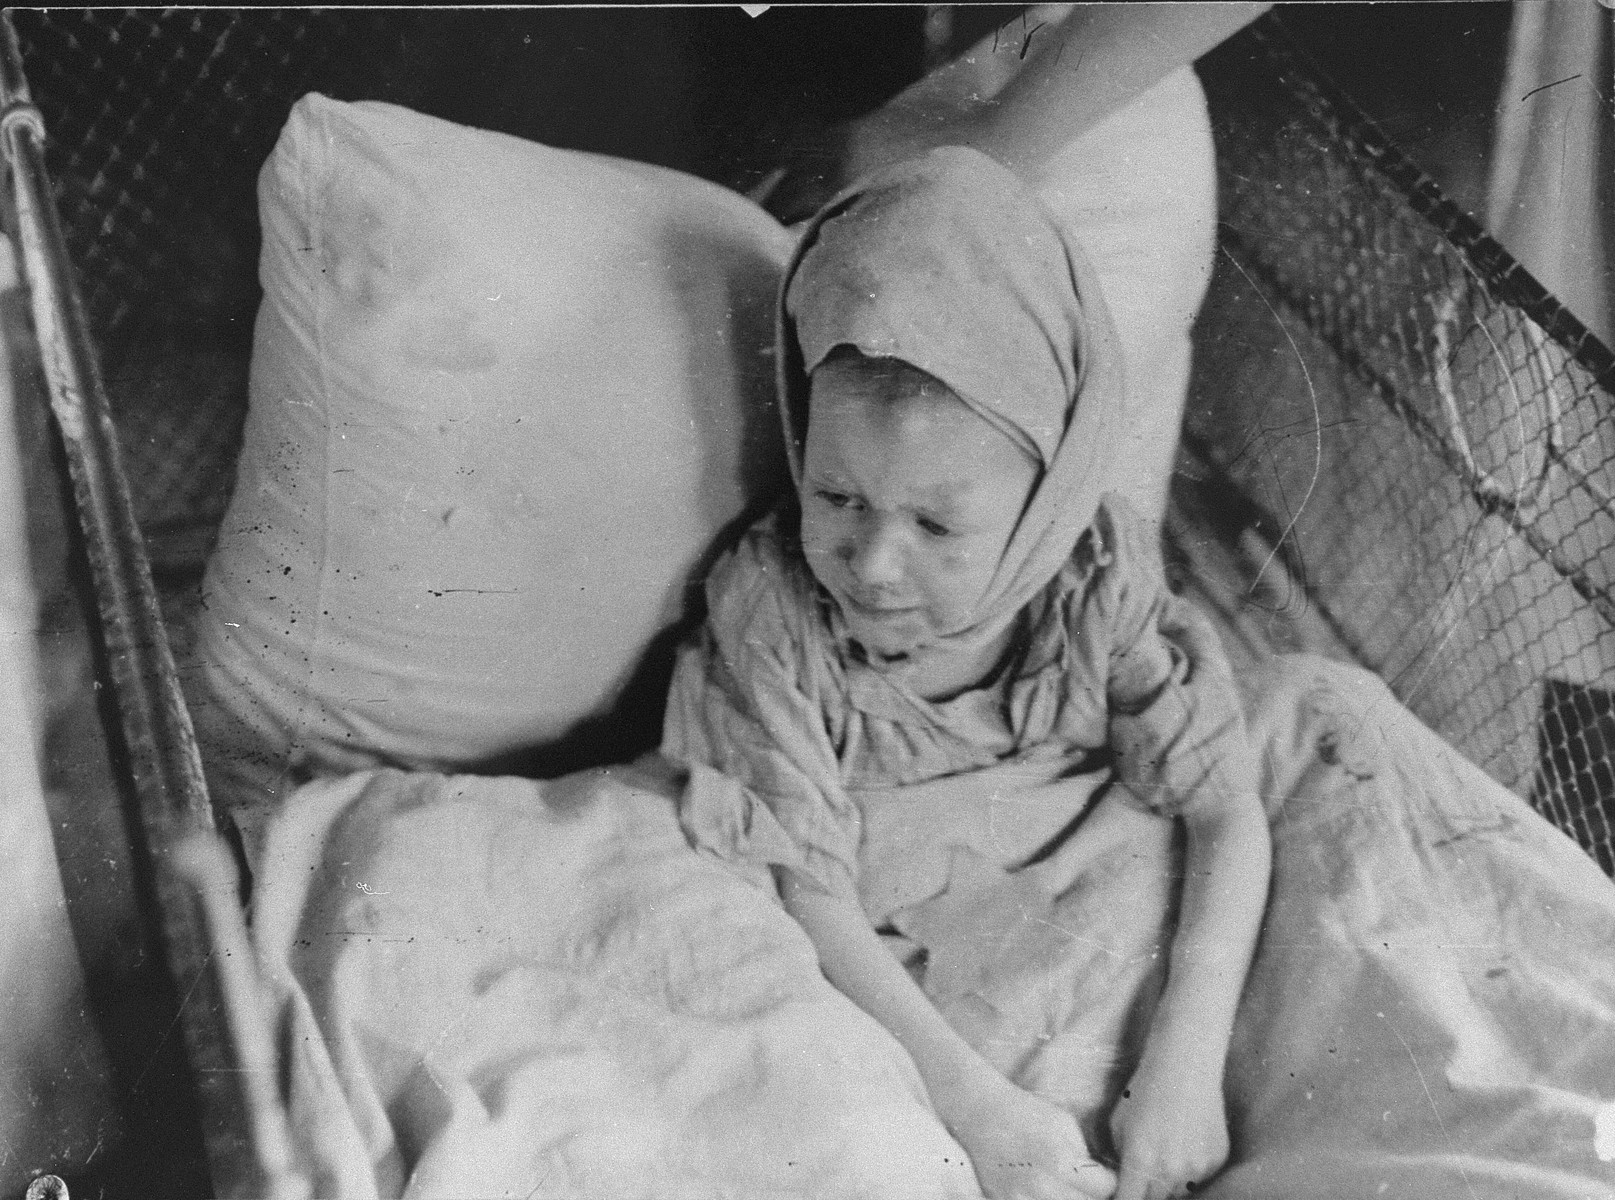 A sick child sits in a crib in the Kovno ghetto hospital, covered by a blanket with a Star of David.